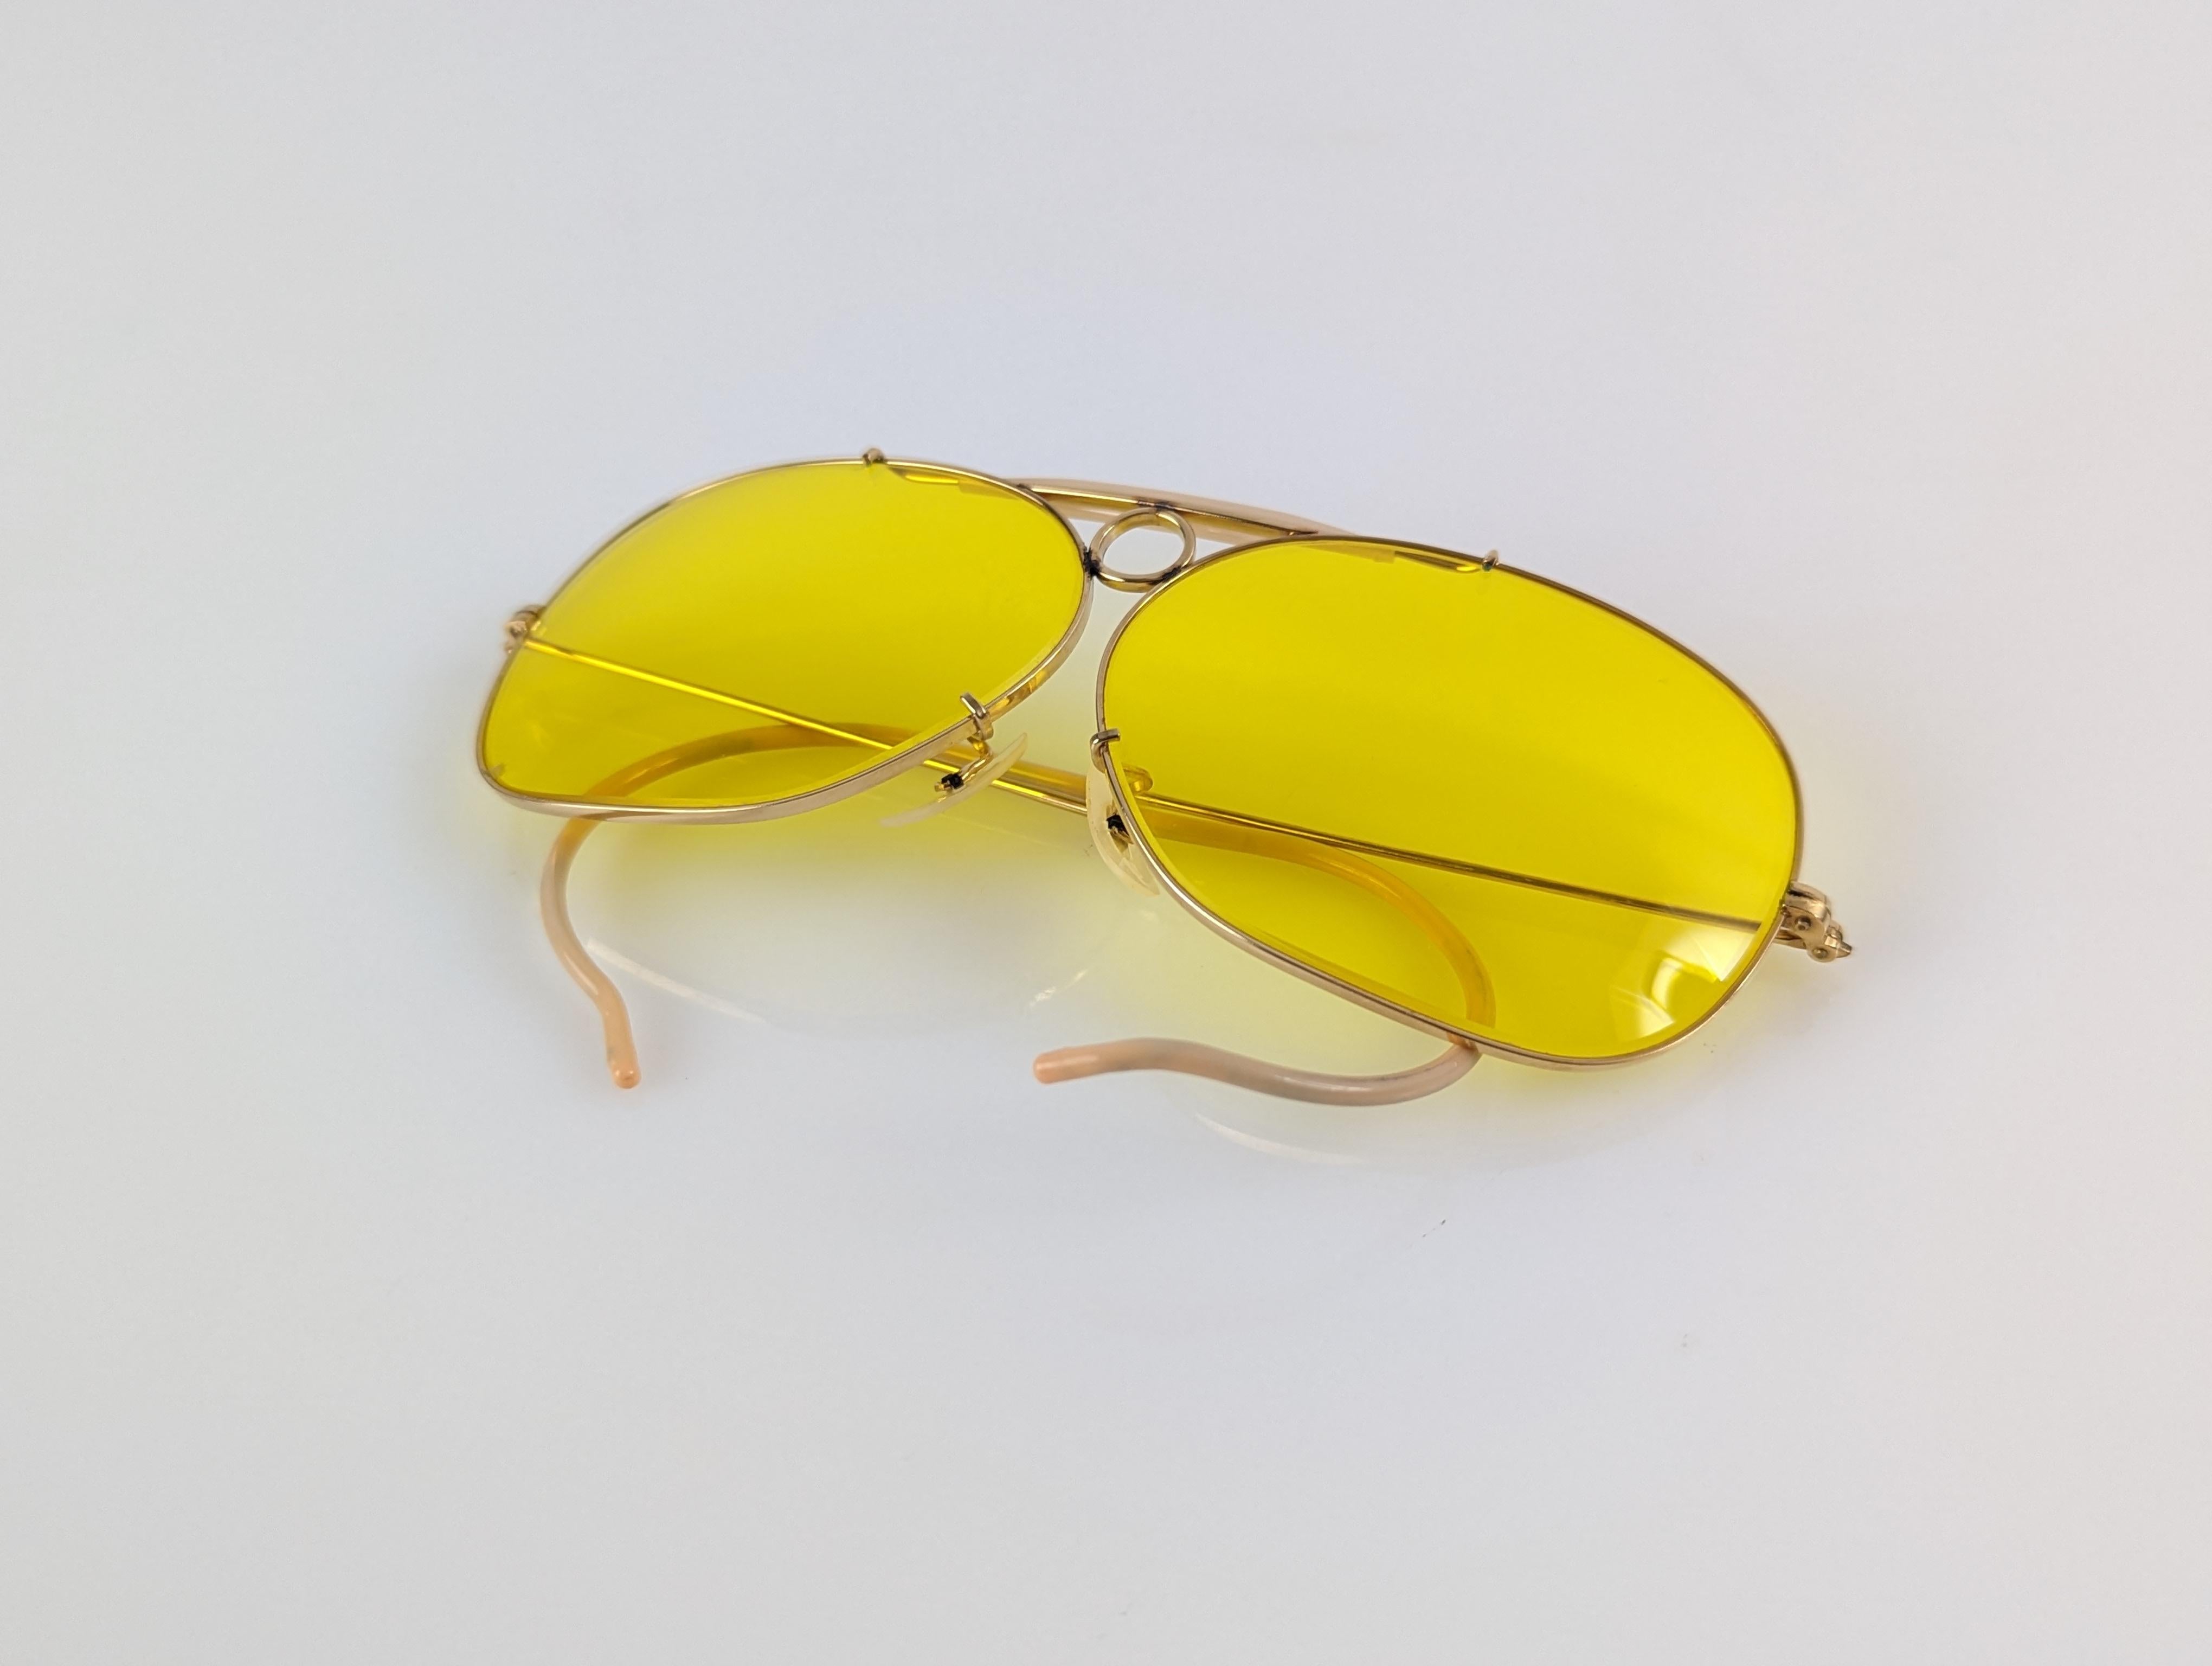 Exclusive Rayban Bausch & Lomb Ray-Ban Shooter 1/30 10K GO Gold 1970s Glasses In Good Condition For Sale In Benalmadena, ES